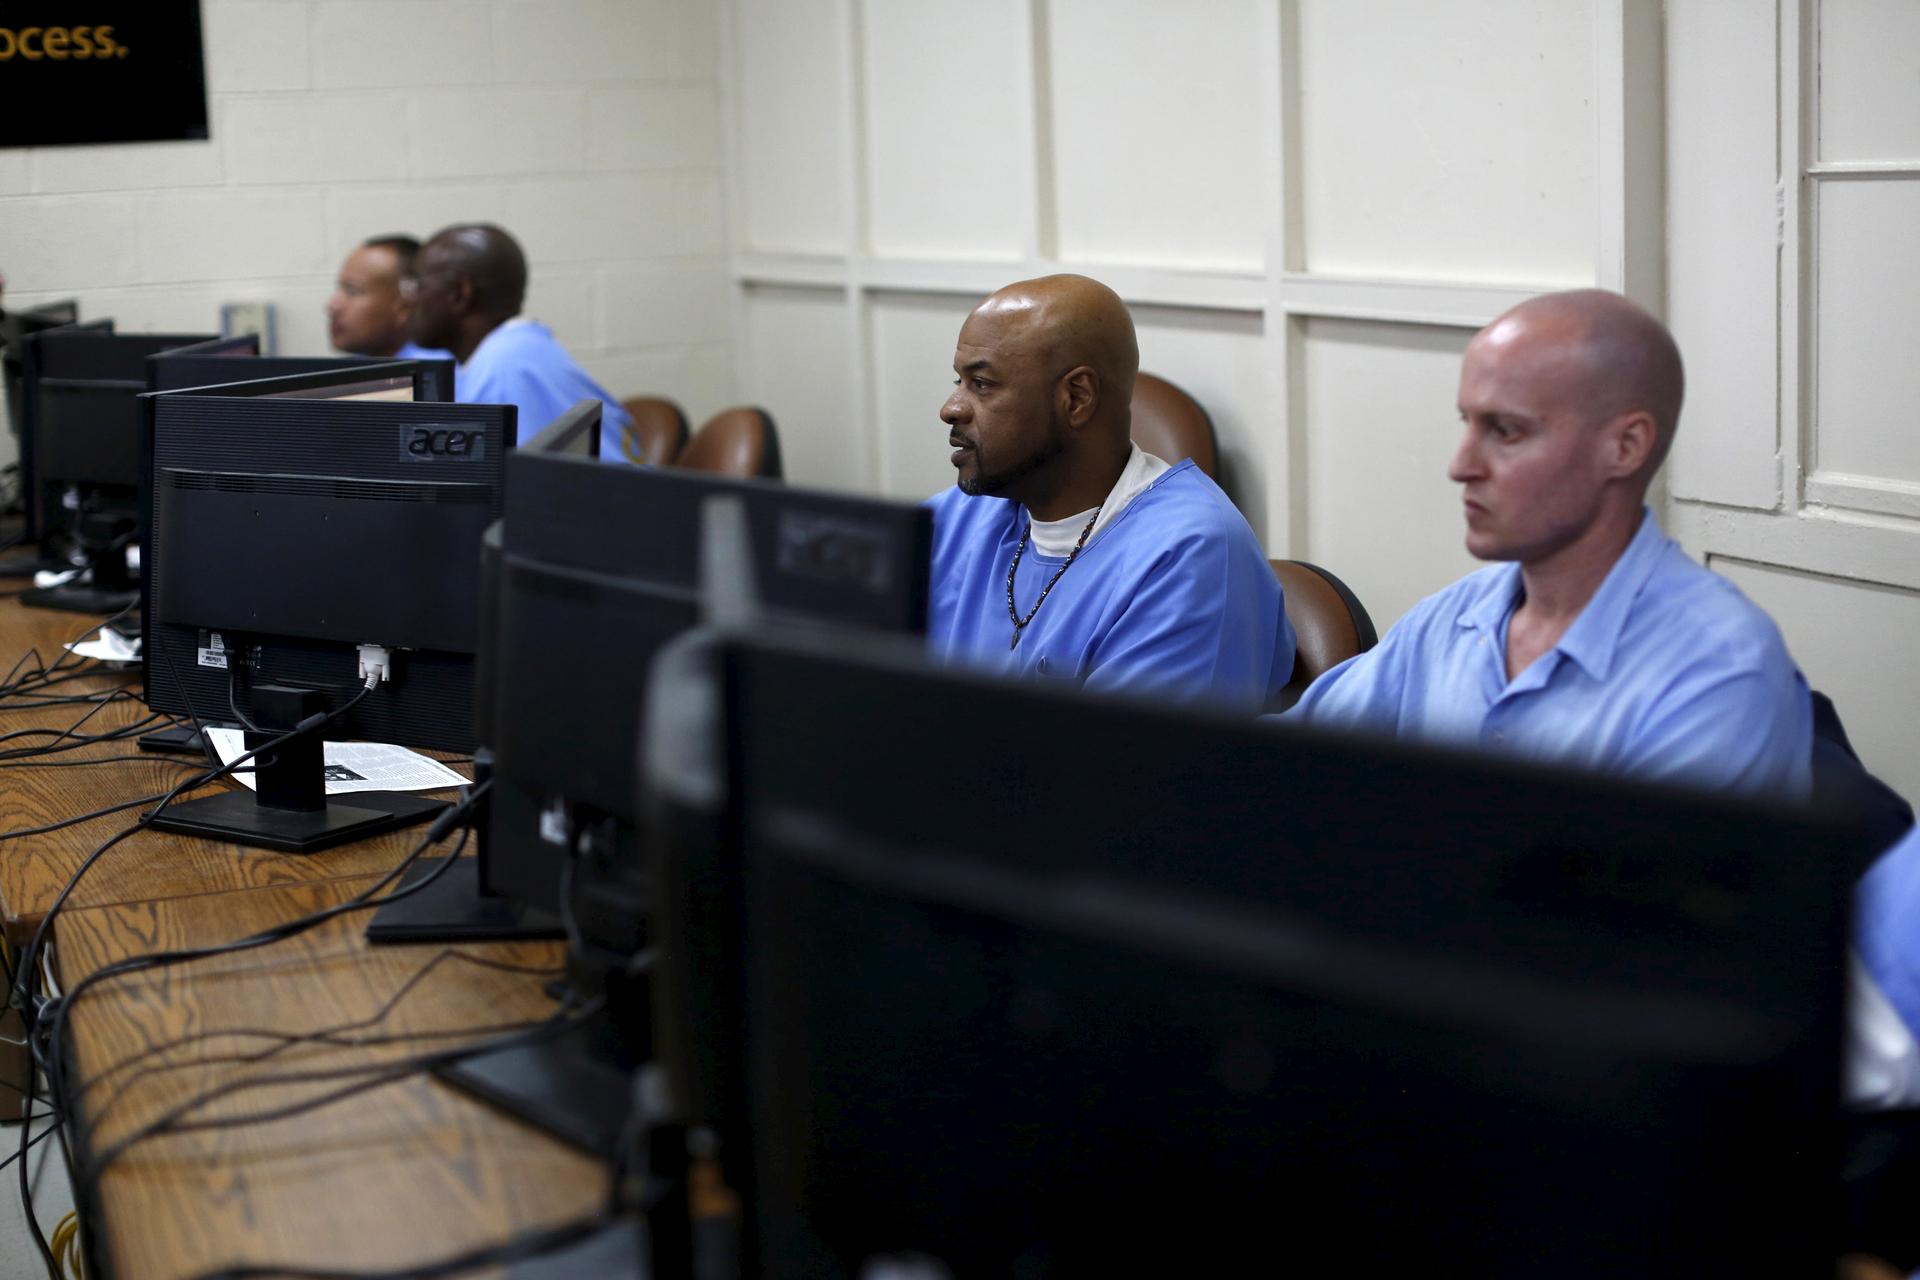 Graduates of a prison computer coding class at work inside San Quentin, in California.